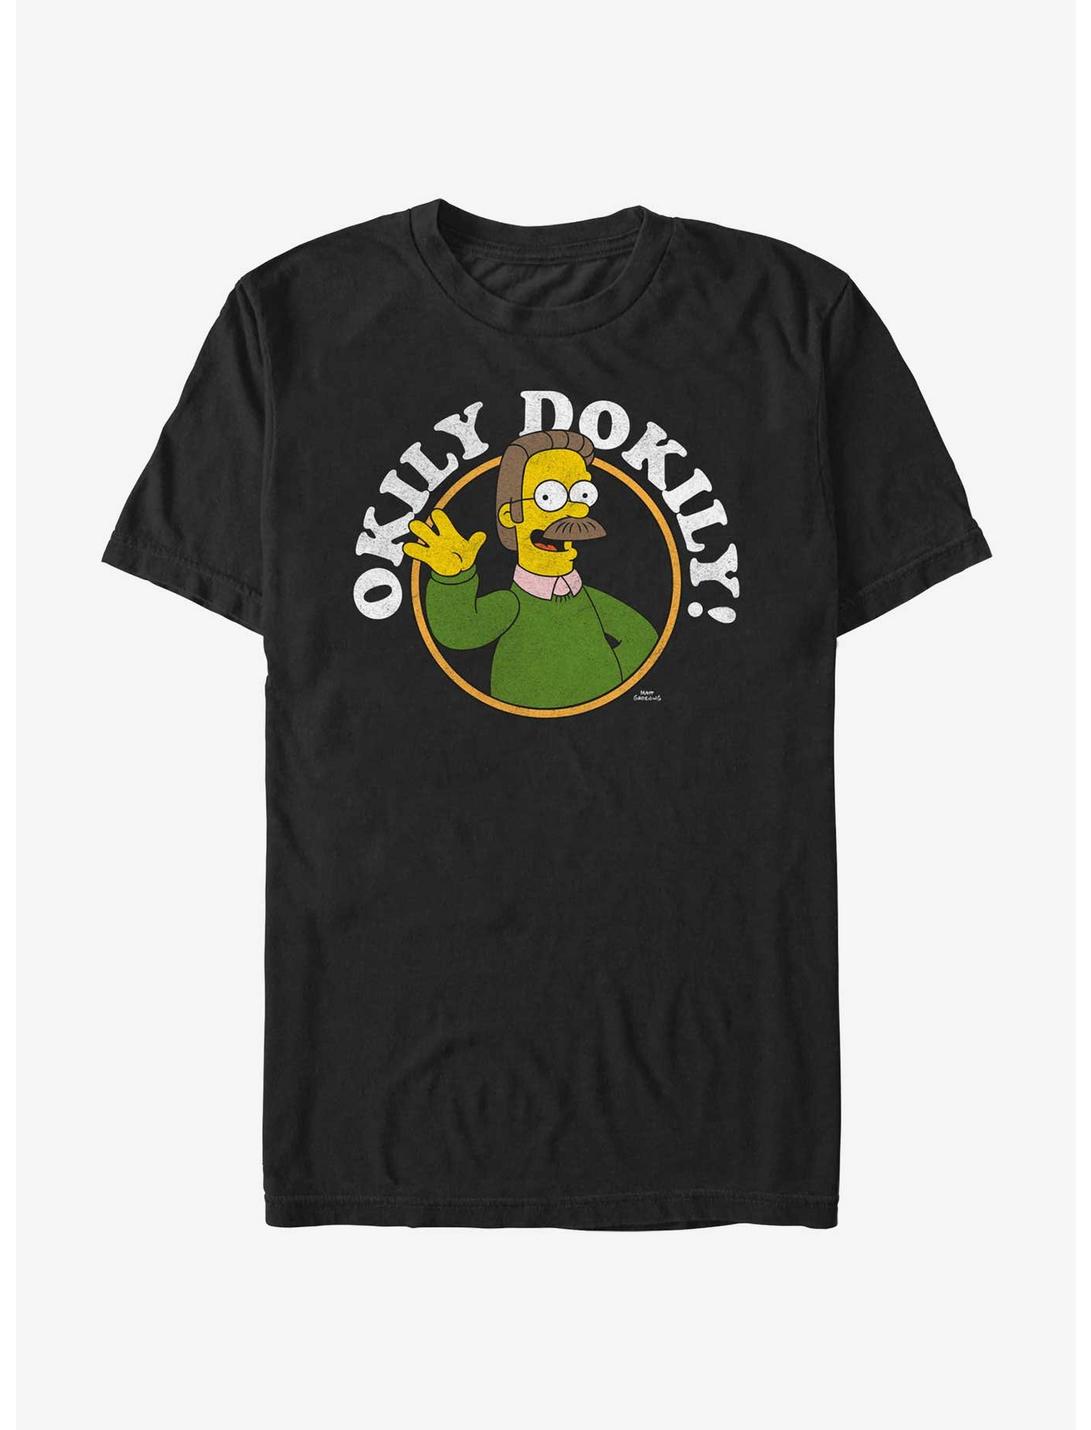 The Simpsons Okily Dokily Ned Flanders T-Shirt, BLACK, hi-res